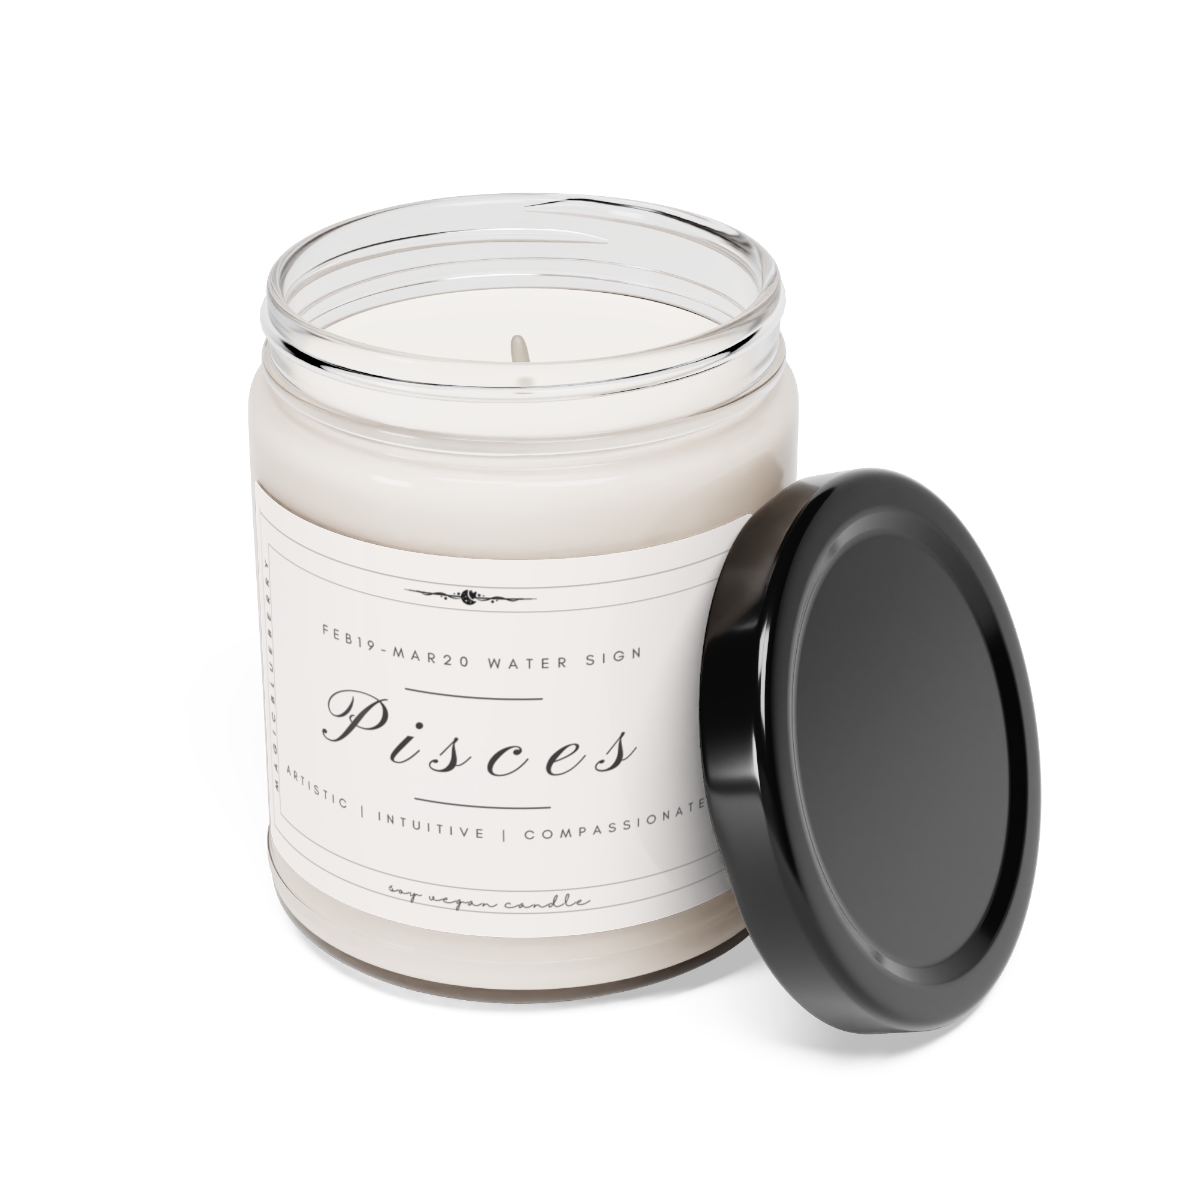 Pisces - Scented Vegan Soy Wax Candle Clear Jar Candle, Spell Candle, Sassy Candle Vegan Candle Cotton Wick Candle Home Deco product thumbnail image